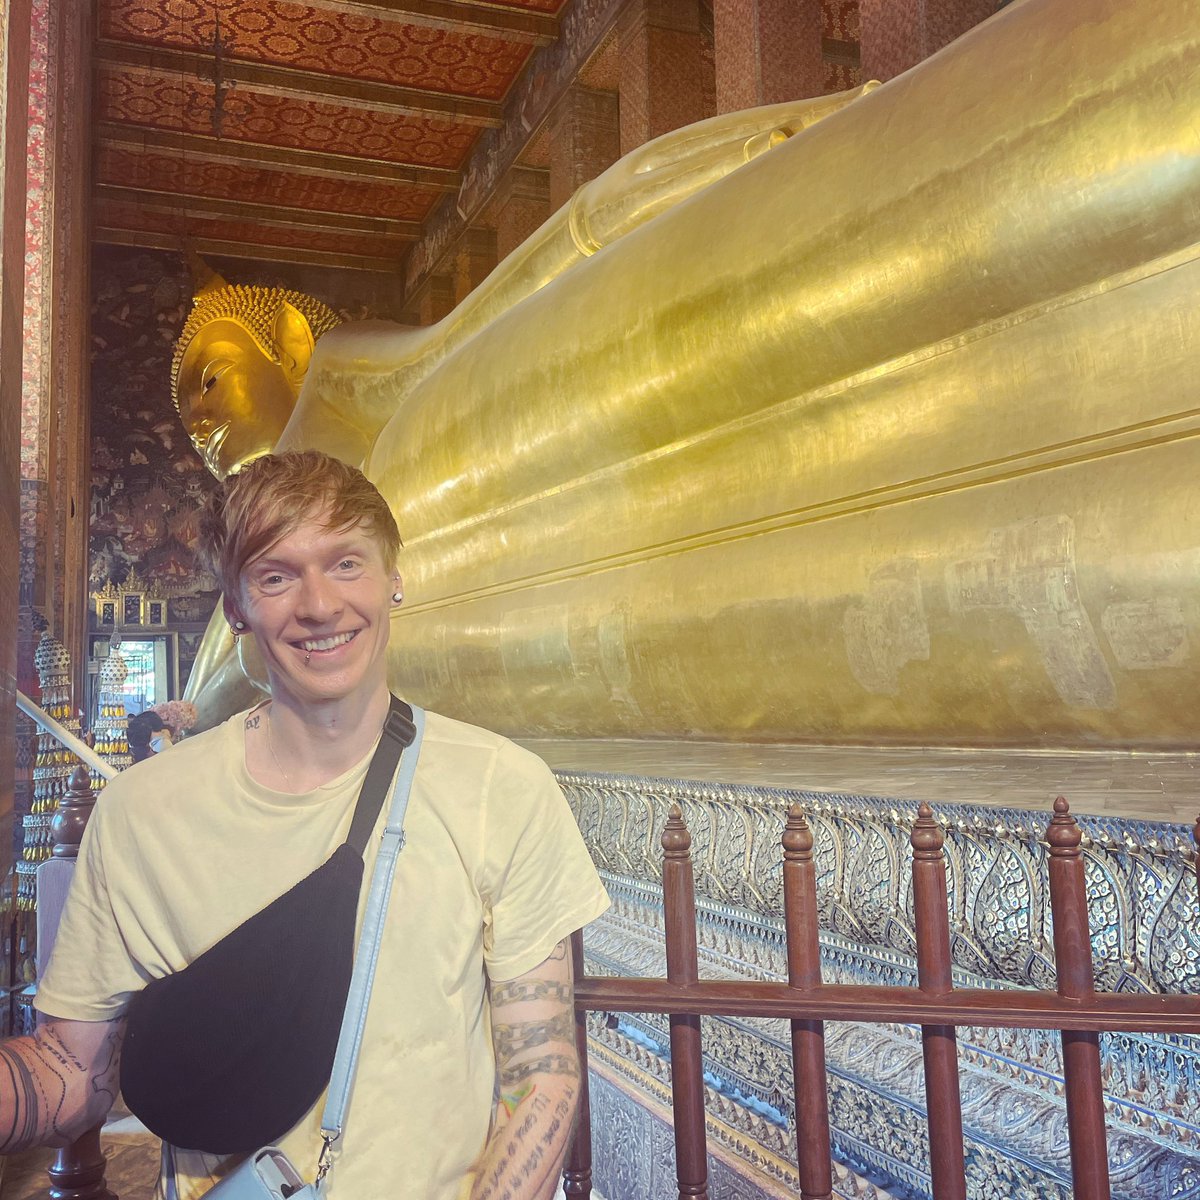 More sweat than man at this point but that is one impressive reclining Buddha. The temple at Wat Pho is considered the earliest centre for public education in Thailand which makes me very happy as a tutor @OxfordConted. Lifelong learning for all :)